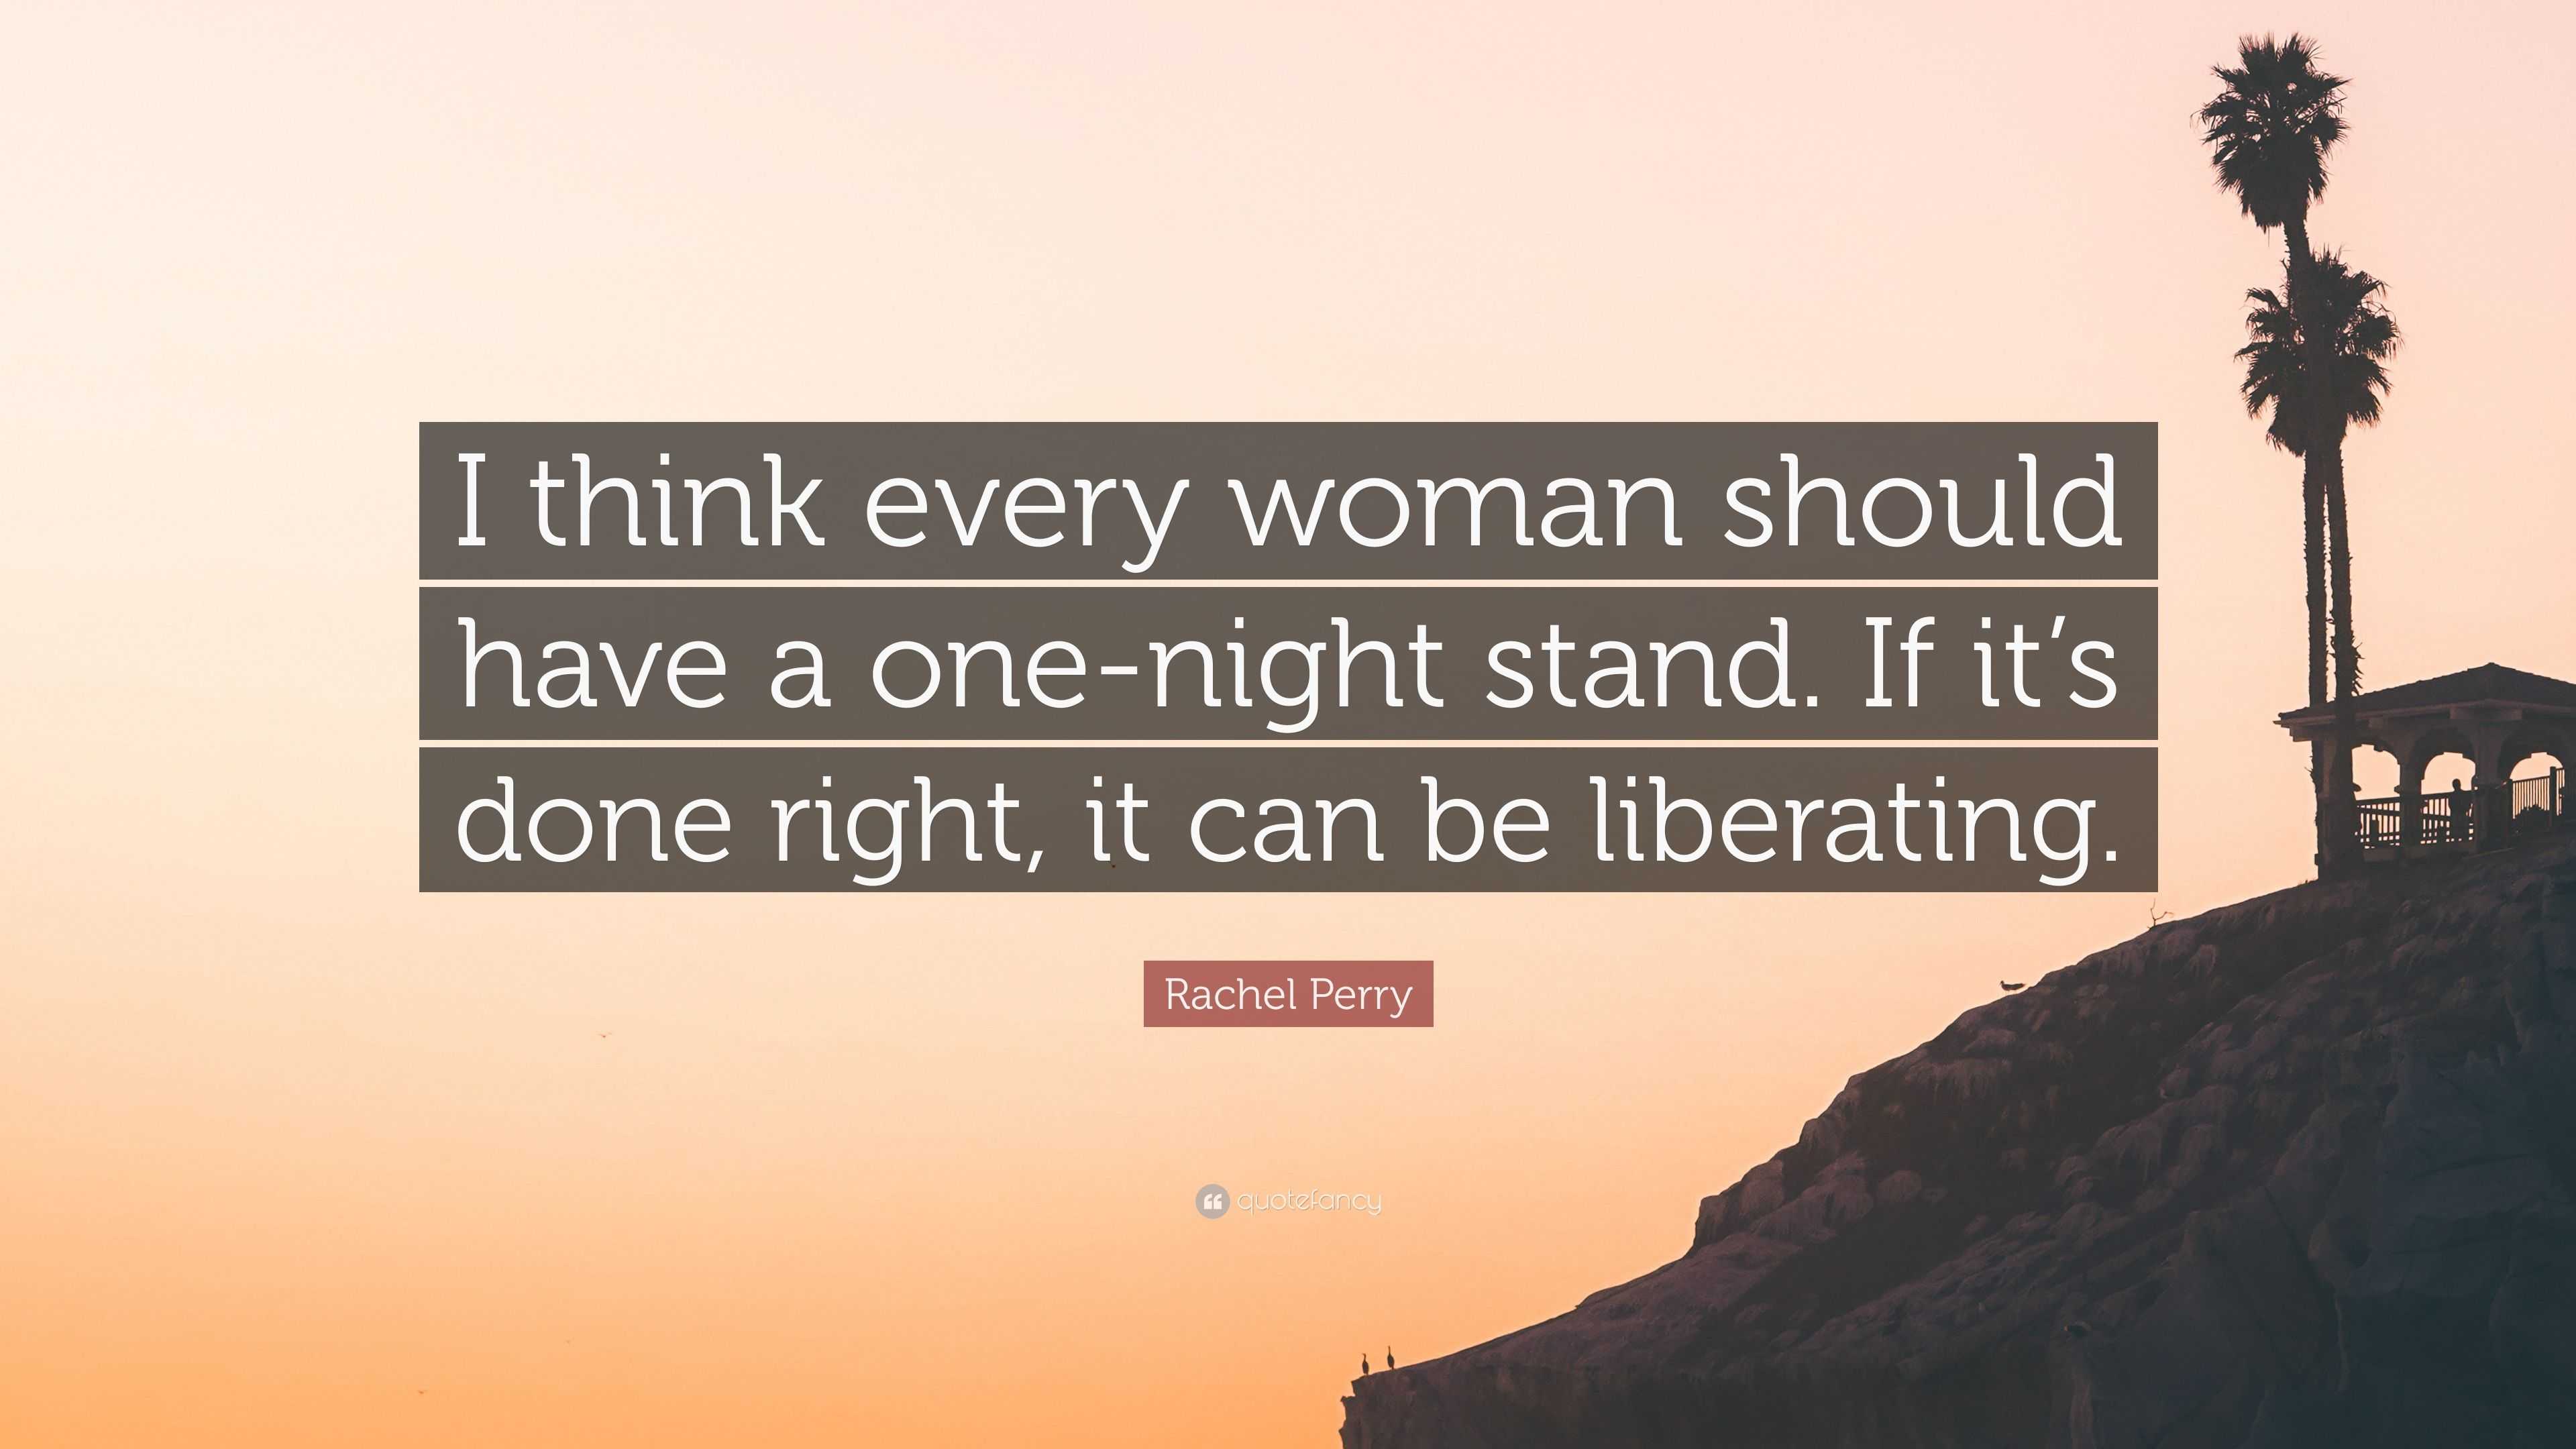 Rachel Perry Quote: “I think every woman should have a one-night stand. If  it's done